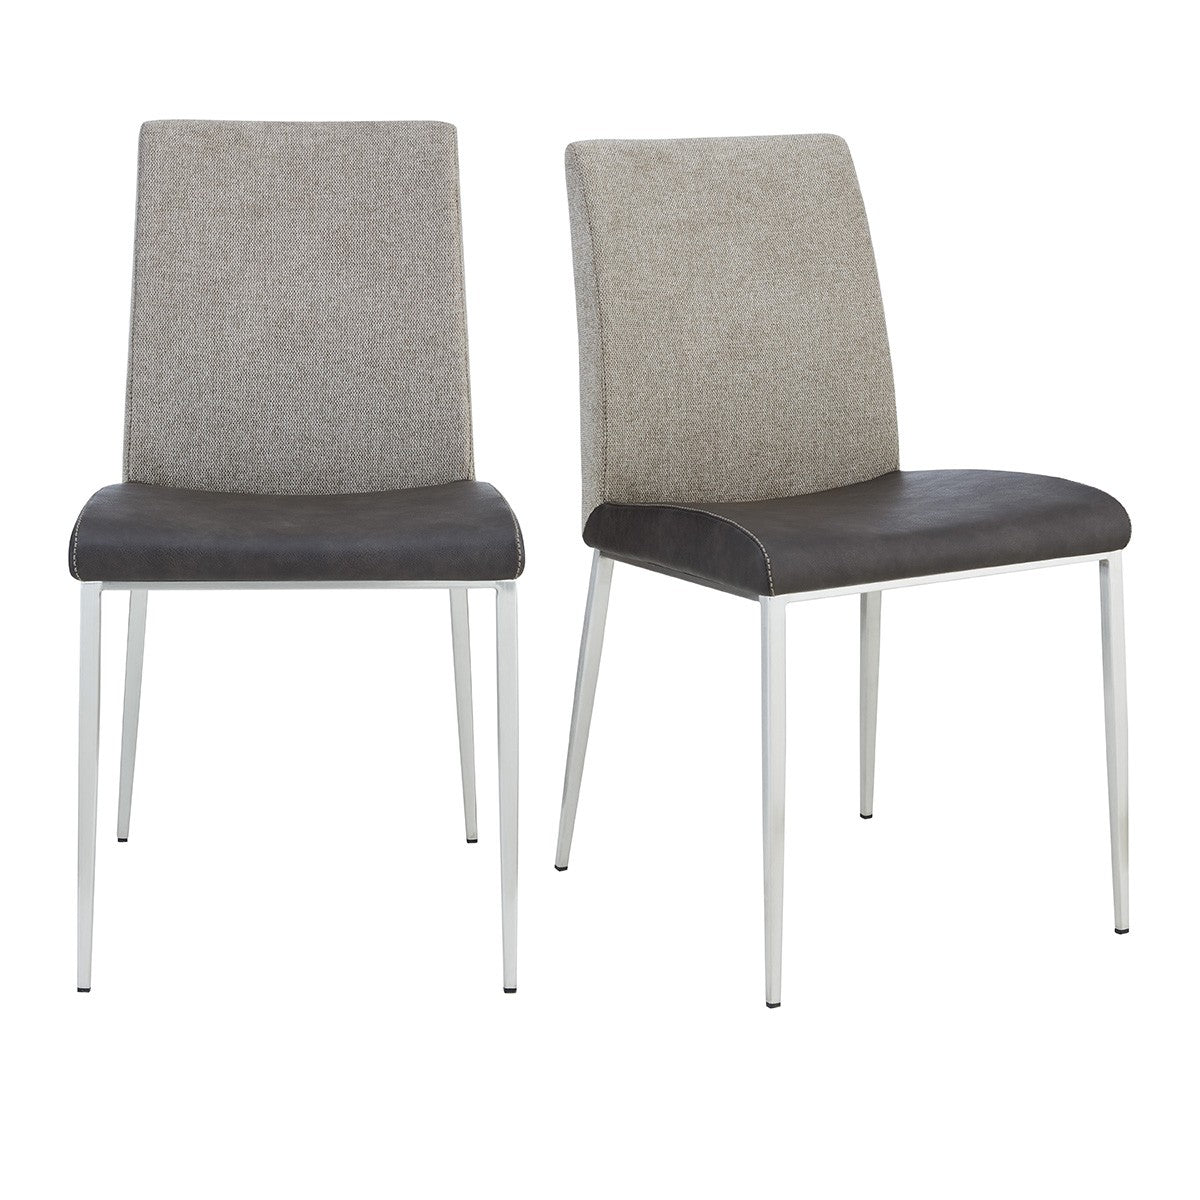 Set of Two Dark Brown and Gray Stainless Steel Chairs